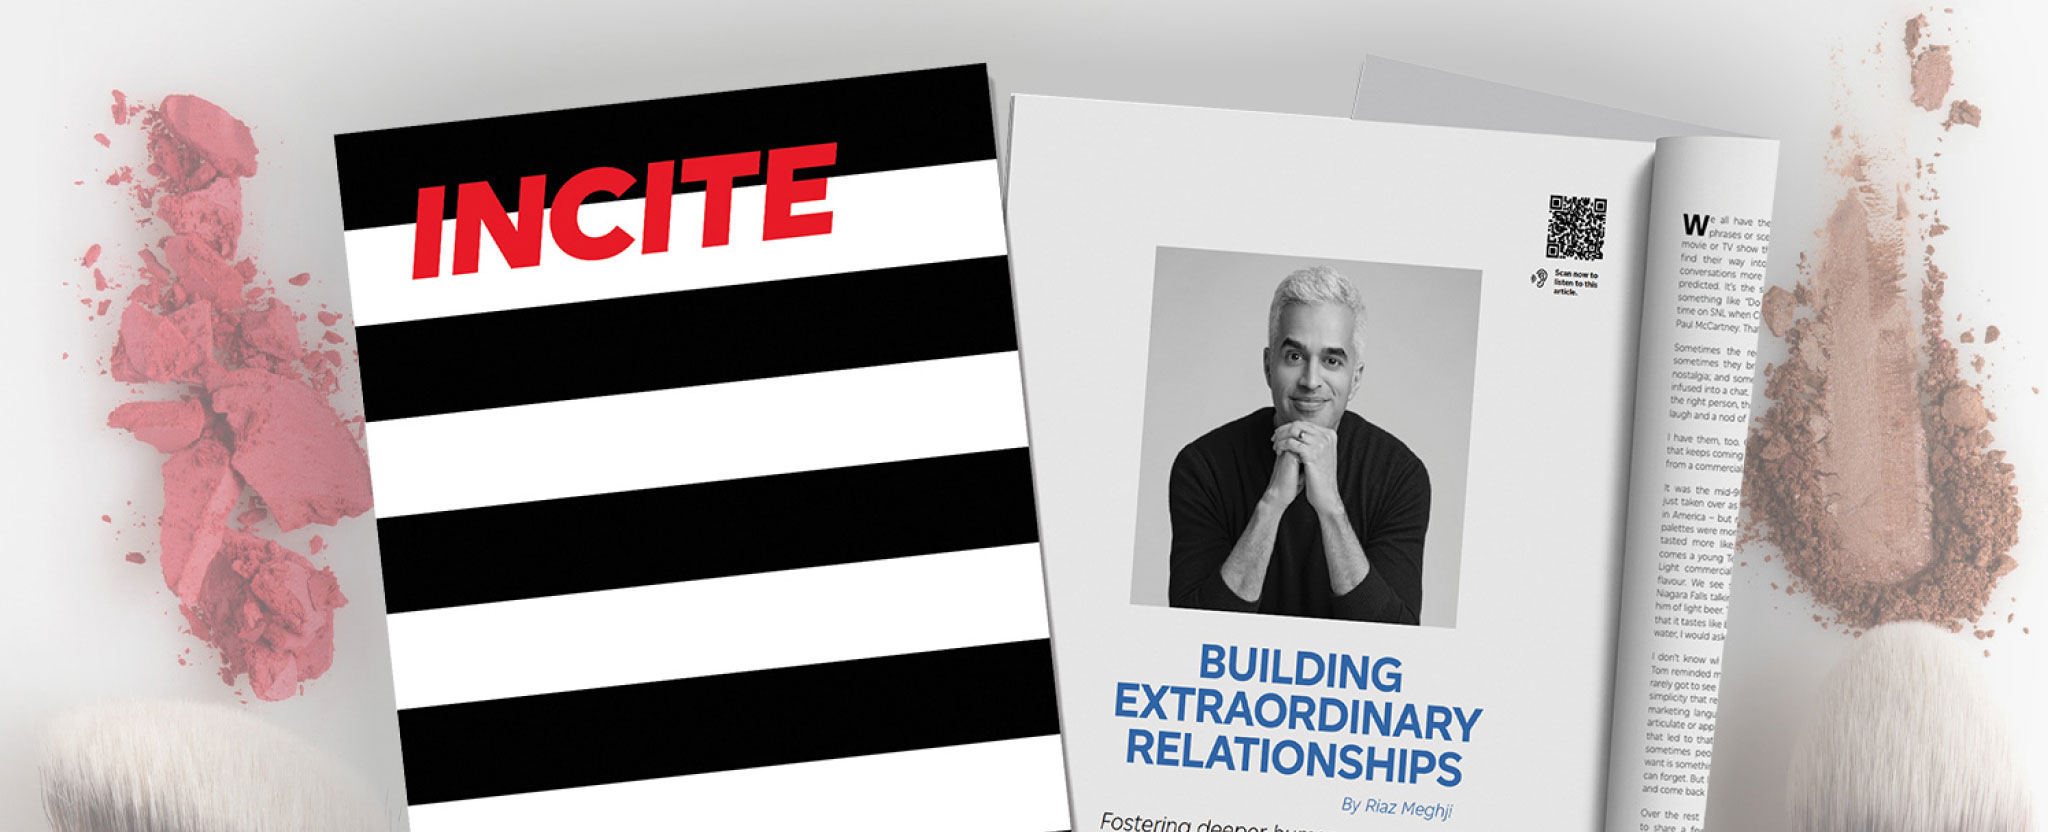 The cover of the “Year Ahead” issue of “Incite” magazine and an interior page open to the “Building extraordinary relationships” article by Riaz Meghji.